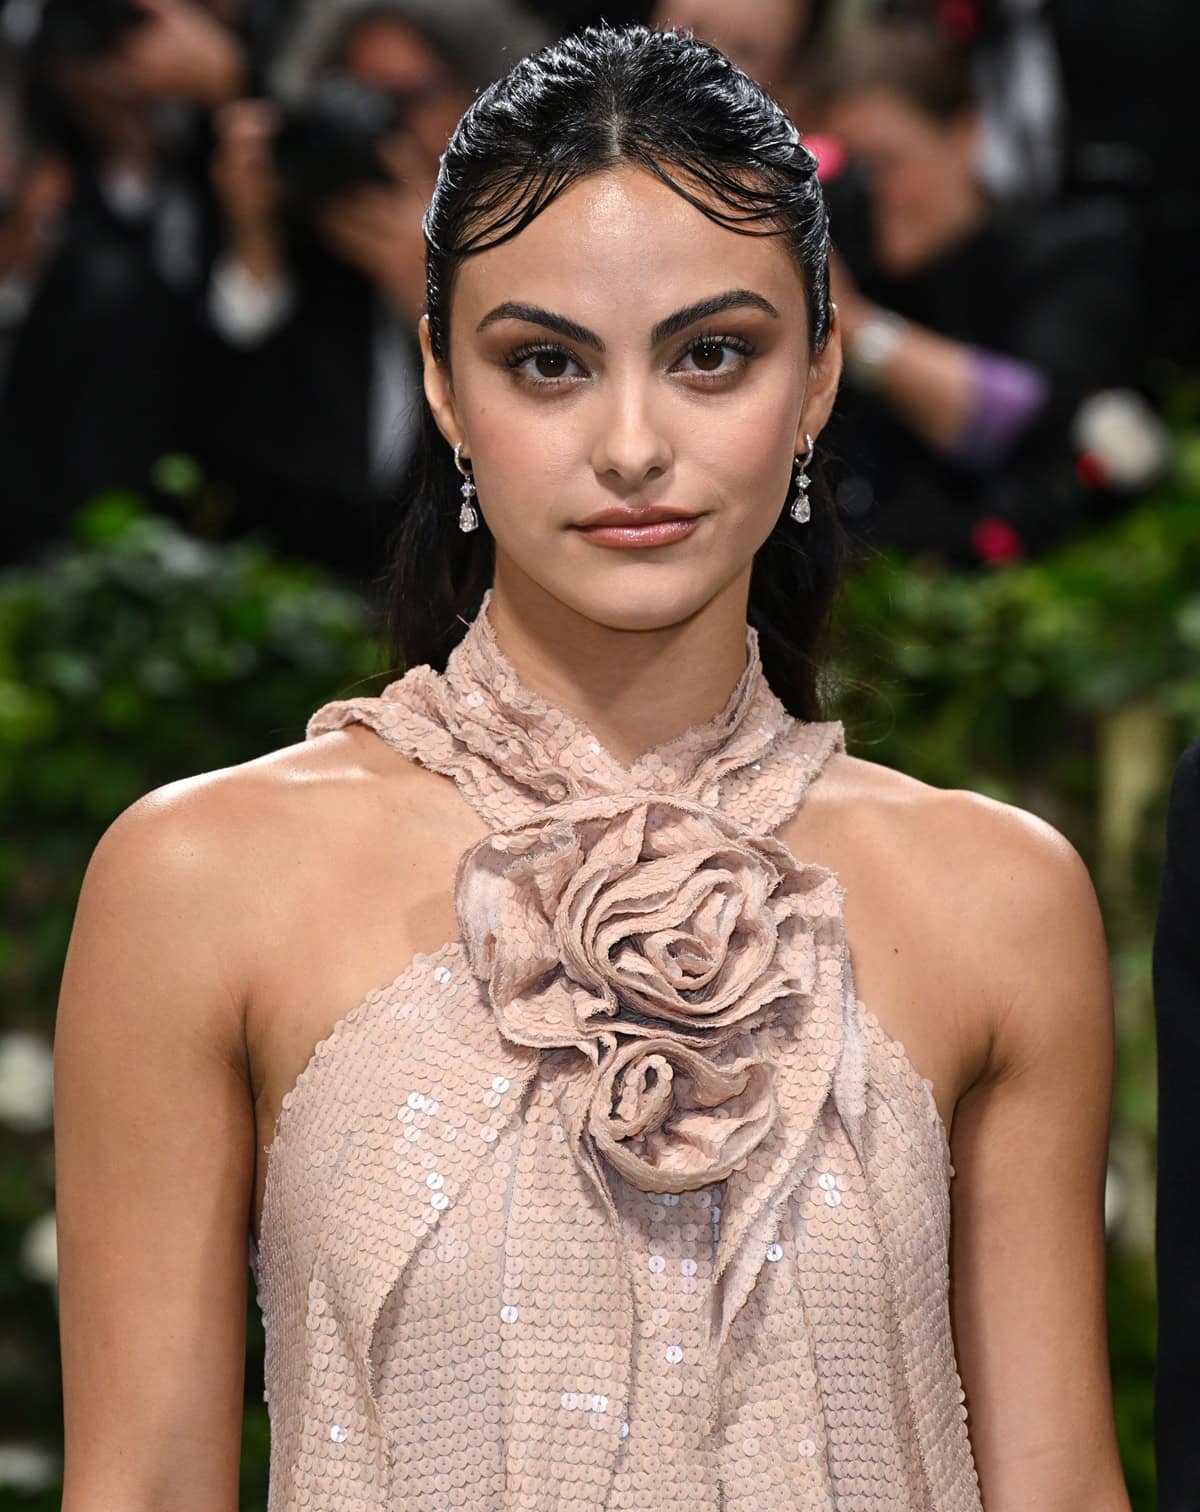 Mendes embraced "The Garden of Time" dress code in a Joseph Altuzarra creation. Her outfit featured a romantic ruffled halter dress adorned with a dramatic rosette at the neckline, perfectly capturing the event's essence and showcasing her flair for blending elegance and glamour